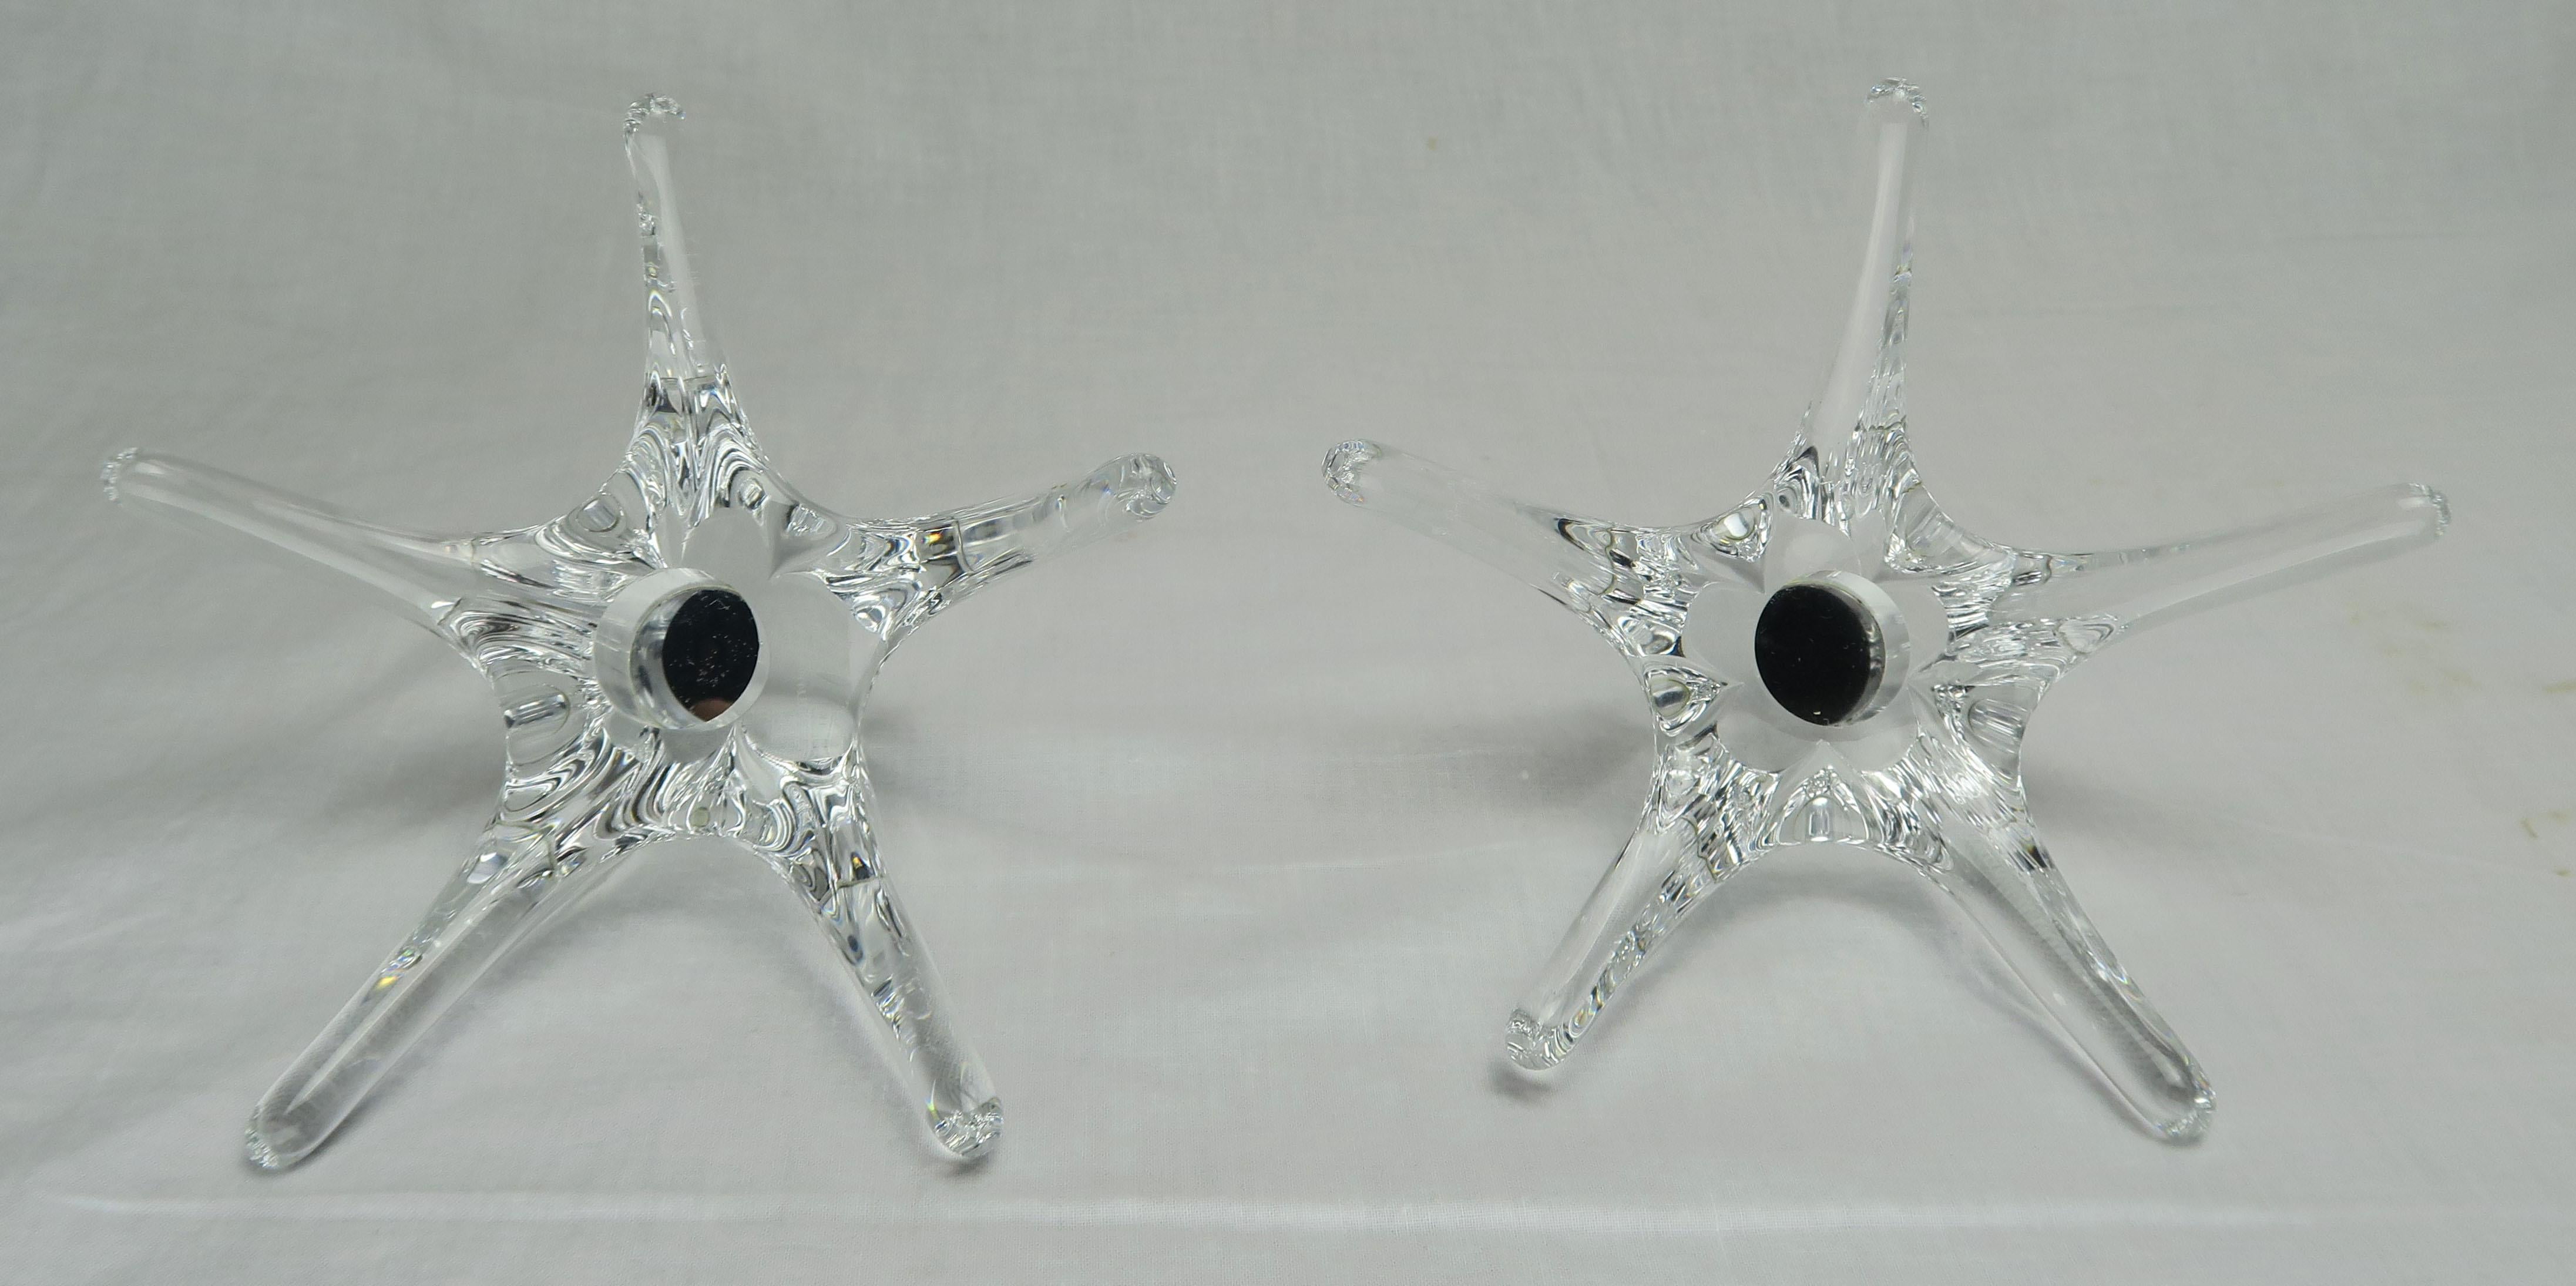 Acrylic French Baccarat Star Candleholders, Pair